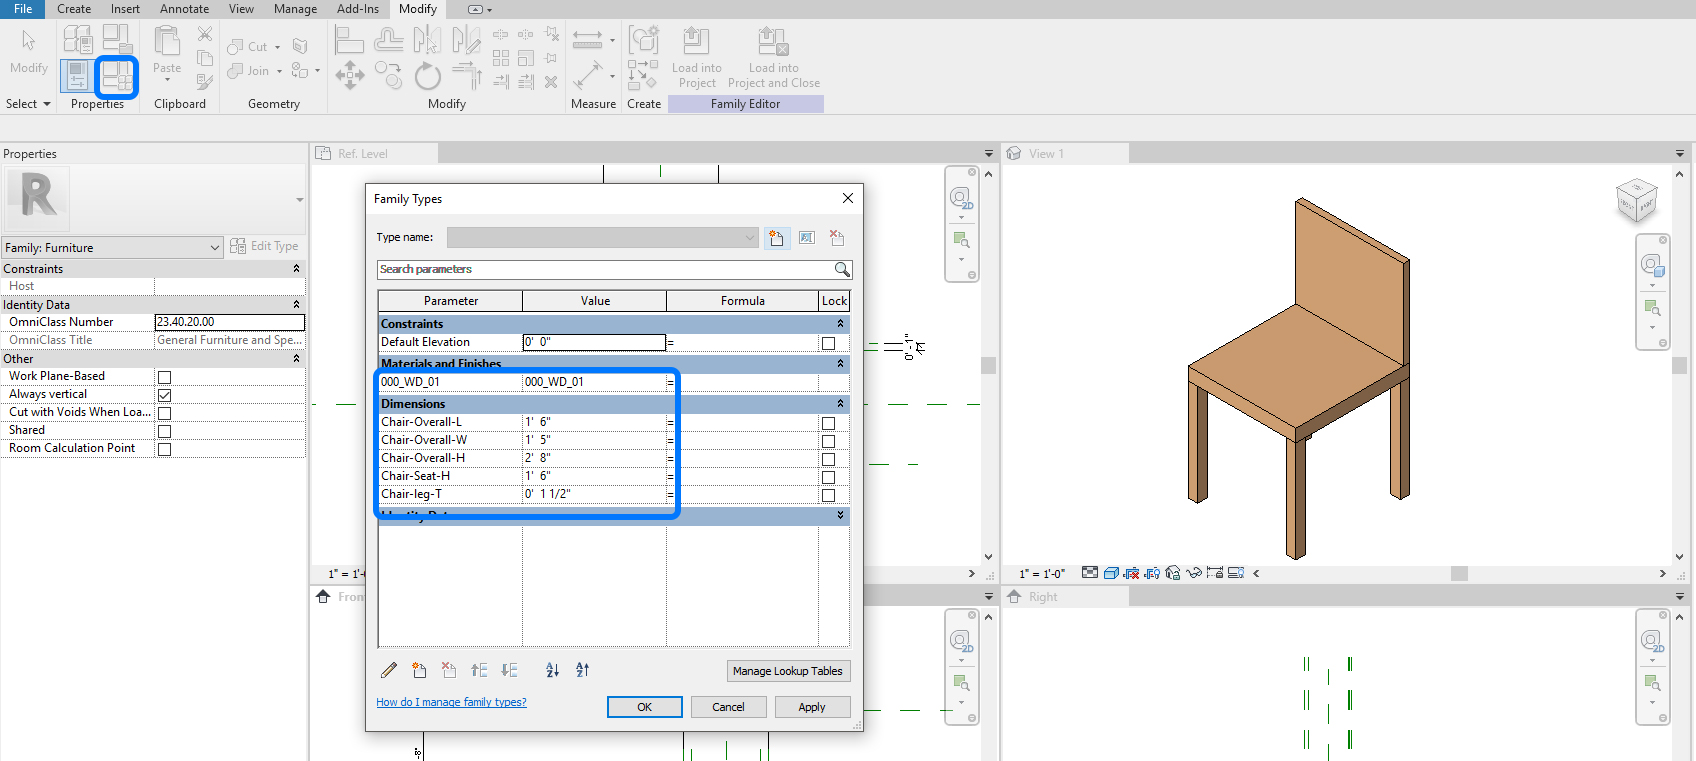 It indicates how to edit the dimensions and materials of the chair.